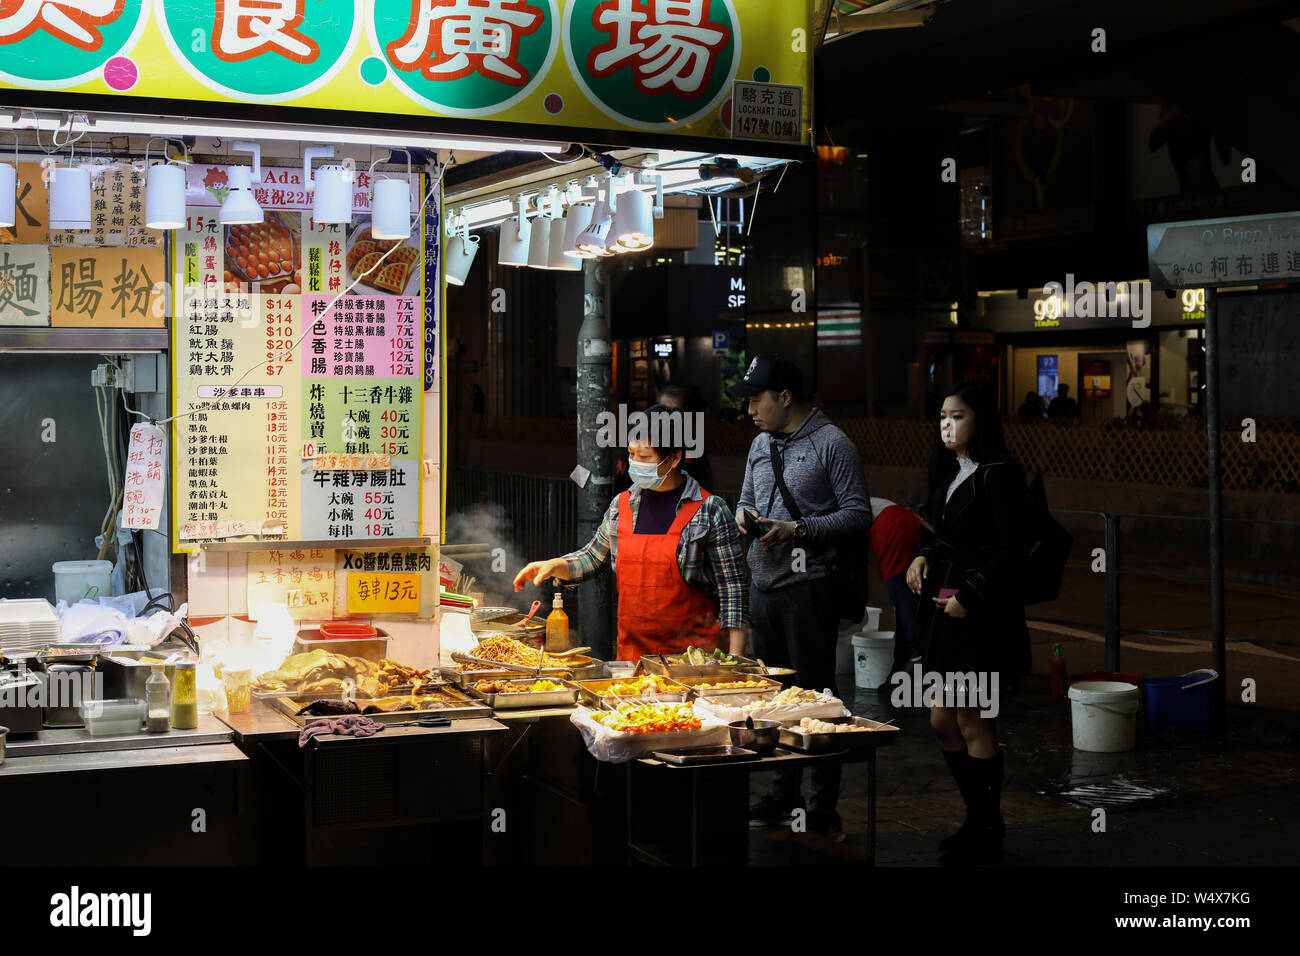 Street food vendor at the corner of Lockhart Road and O'Brien Road in Hong Kong Special Administrative Region of the People's Republic of China Stock Photo